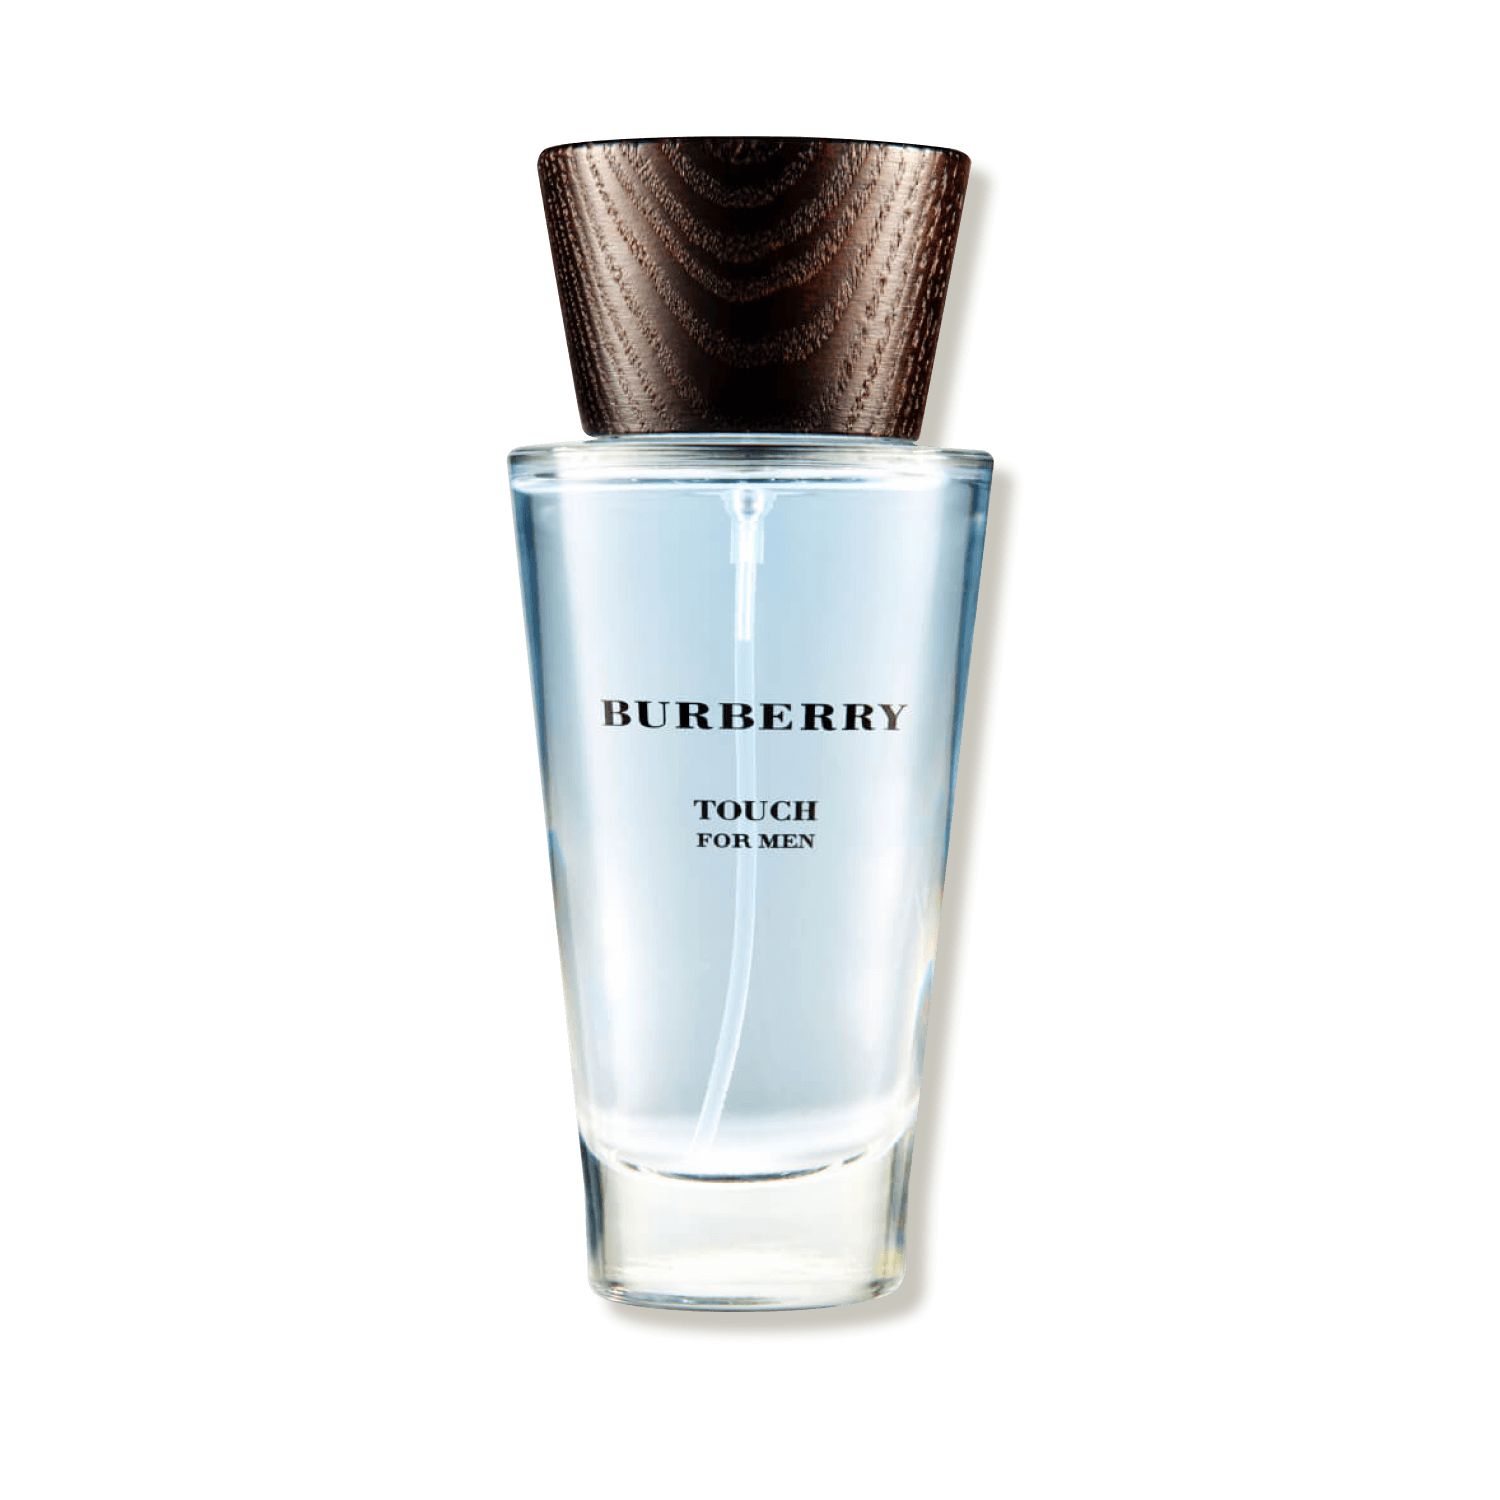 Buy BURBERRY Burberry Men Scentbird for Touch for at